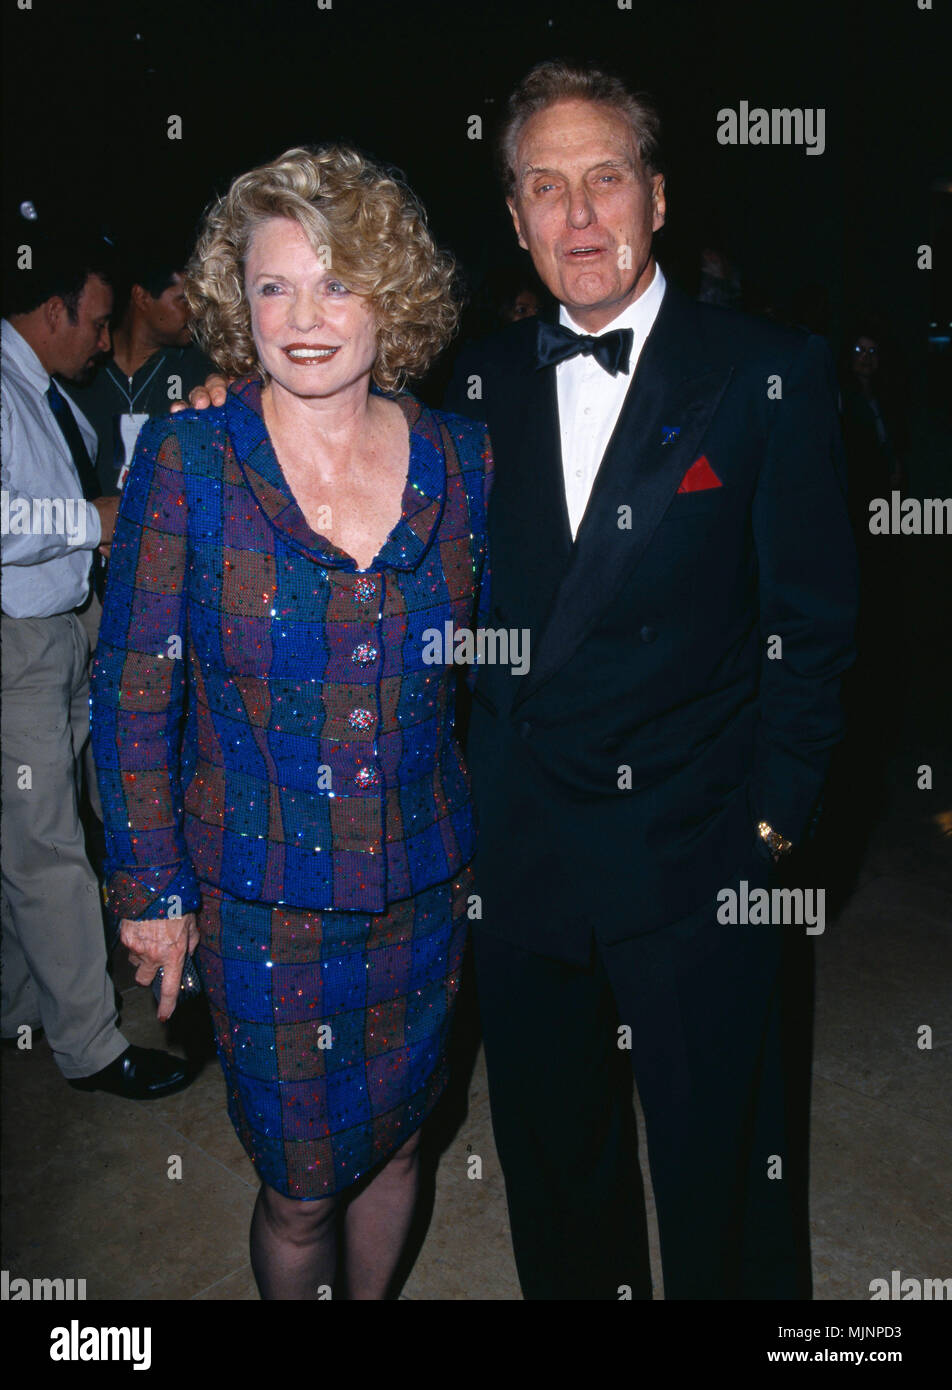 Robert Stack with Wife --- ' Tsuni / Bourquard 'Robert Stack with Wife Robert Stack with Wife Robert Stack with Wife Event in Hollywood Life - California,  Red Carpet Event, Vertical, USA, Film Industry, Celebrities,  Photography, Bestof, Arts Culture and Entertainment, Topix  Celebrities fashion /  from the Red Carpet-1994-2000, one person, Vertical, Best of, Hollywood Life, Event in Hollywood Life - California,  Red Carpet and backstage, USA, Film Industry, Celebrities,  Photography, Bestof, Arts Culture and Entertainment,  Topix Family Related inquiry tsuni@Gamma-USA.com Stock Photo